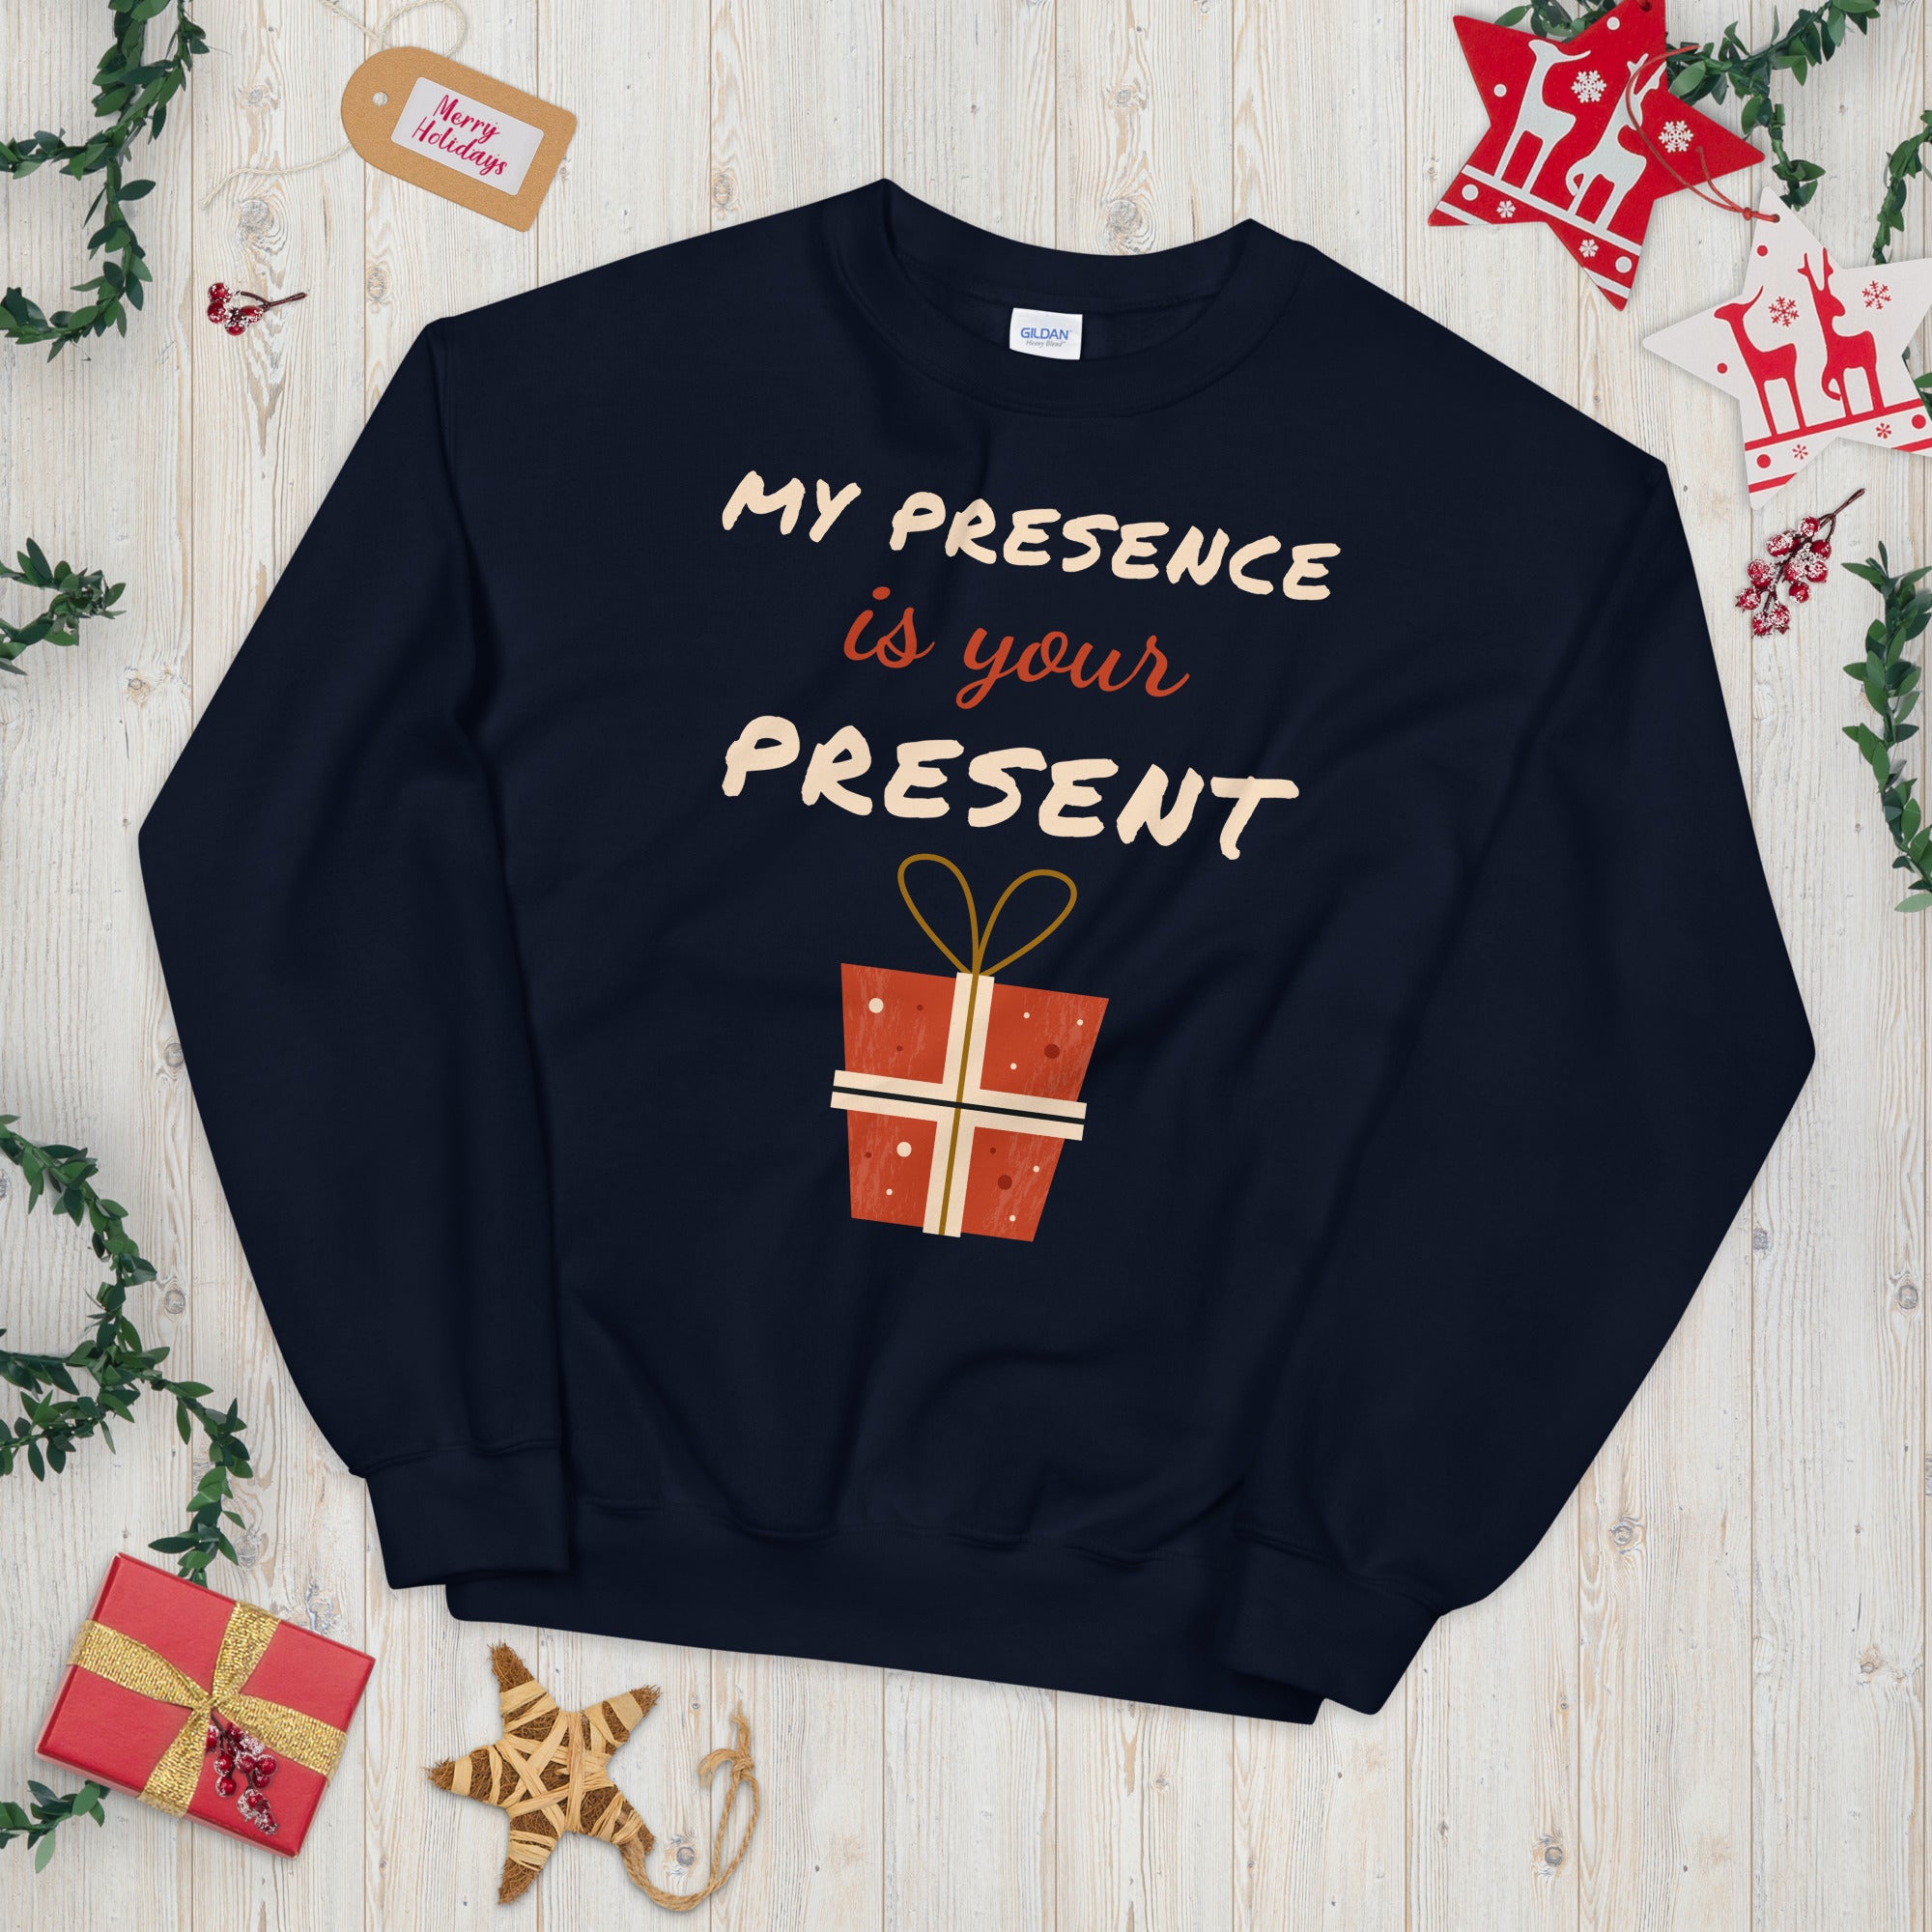 My Presence Is Your Present Sweatshirt, Christmas Sweater for Women,Merry and Bright, Funny Xmas Sweater, Cute Party Sweater, Xmas Pajamas